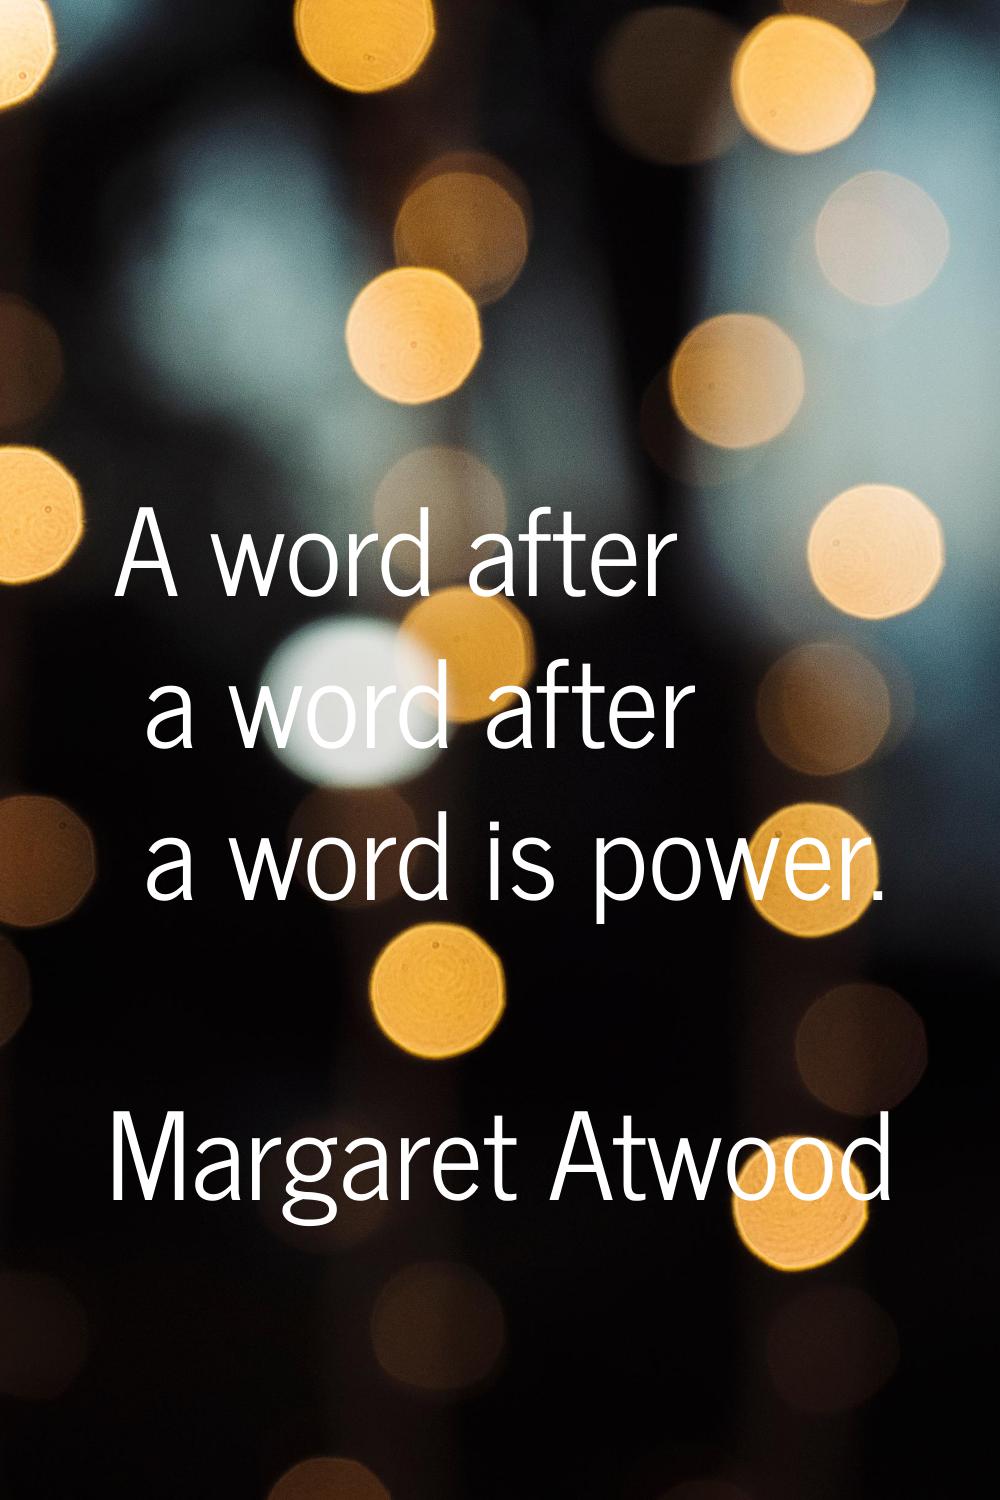 A word after a word after a word is power.